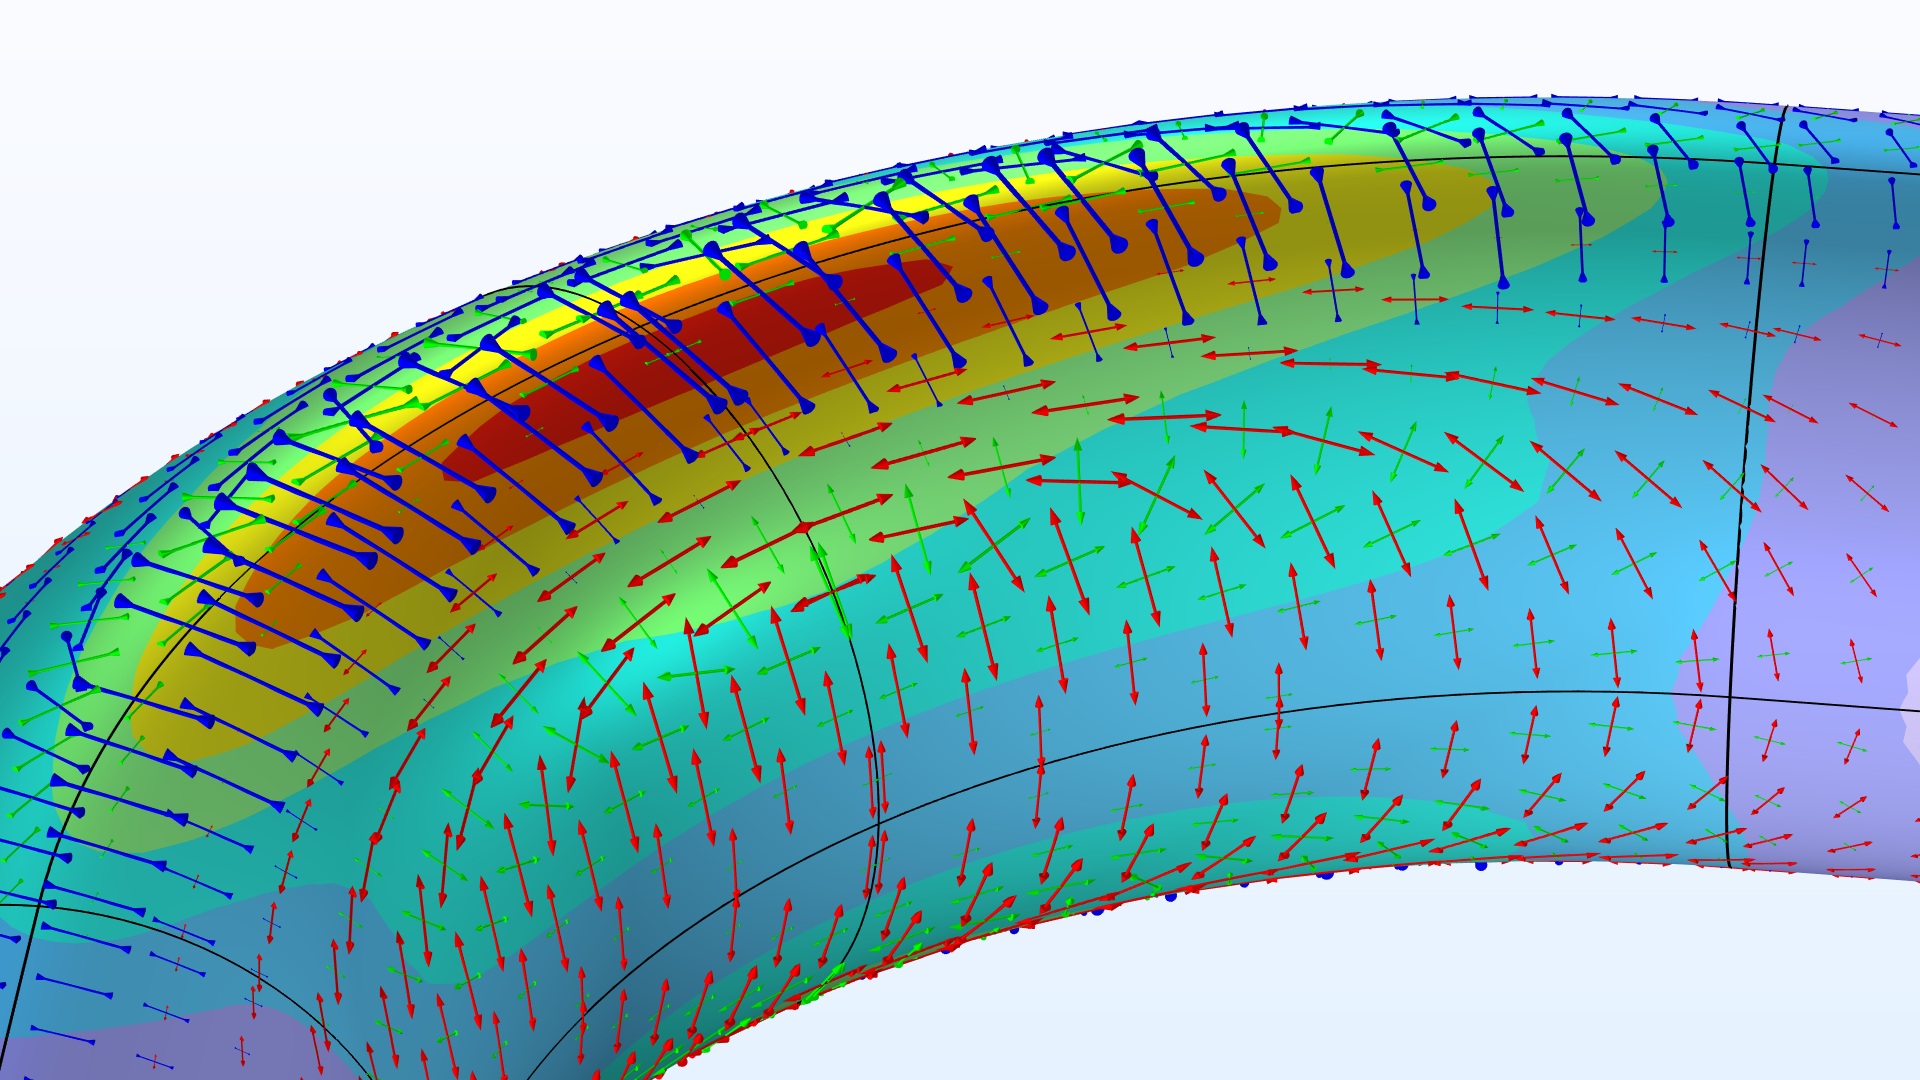 A close-up view of the pipe bend showing the Von Mises stress and principal stresses for a wall thickness of 5 percent.